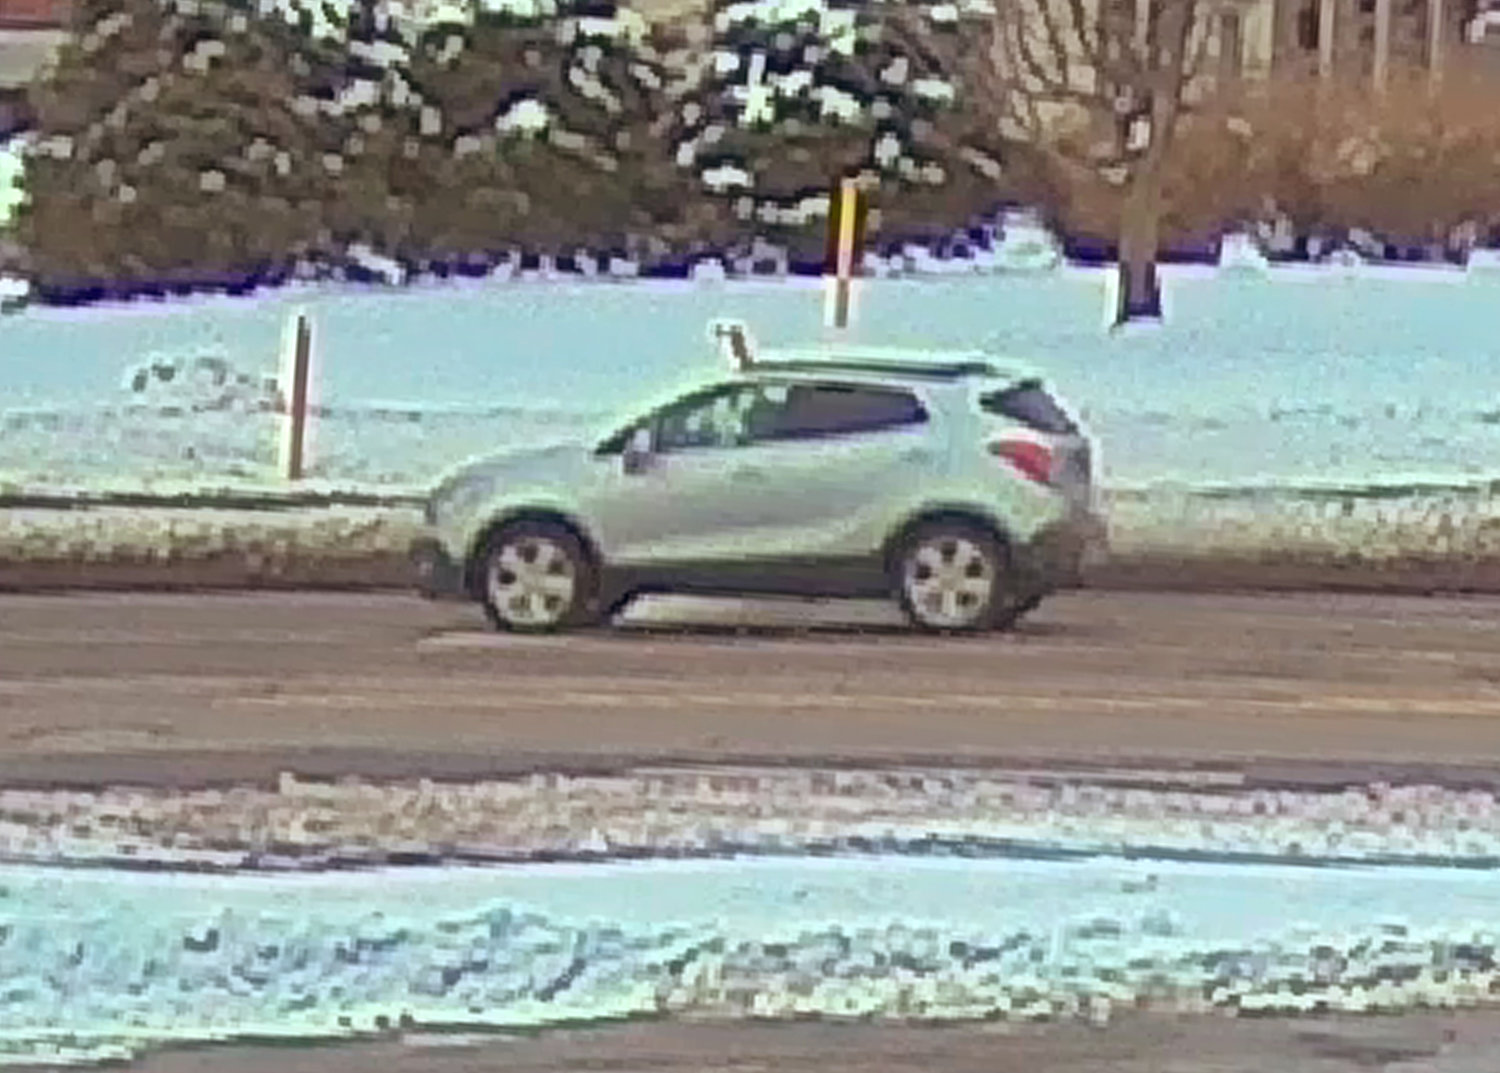 This silver SUV struck a pedestrian on Black River Boulevard in Rome on Wednesday. Police said the vehicle then fled the scene. Following an investigation, police said the SUV was found in the 800 block of W. Liberty St. Thursday morning.